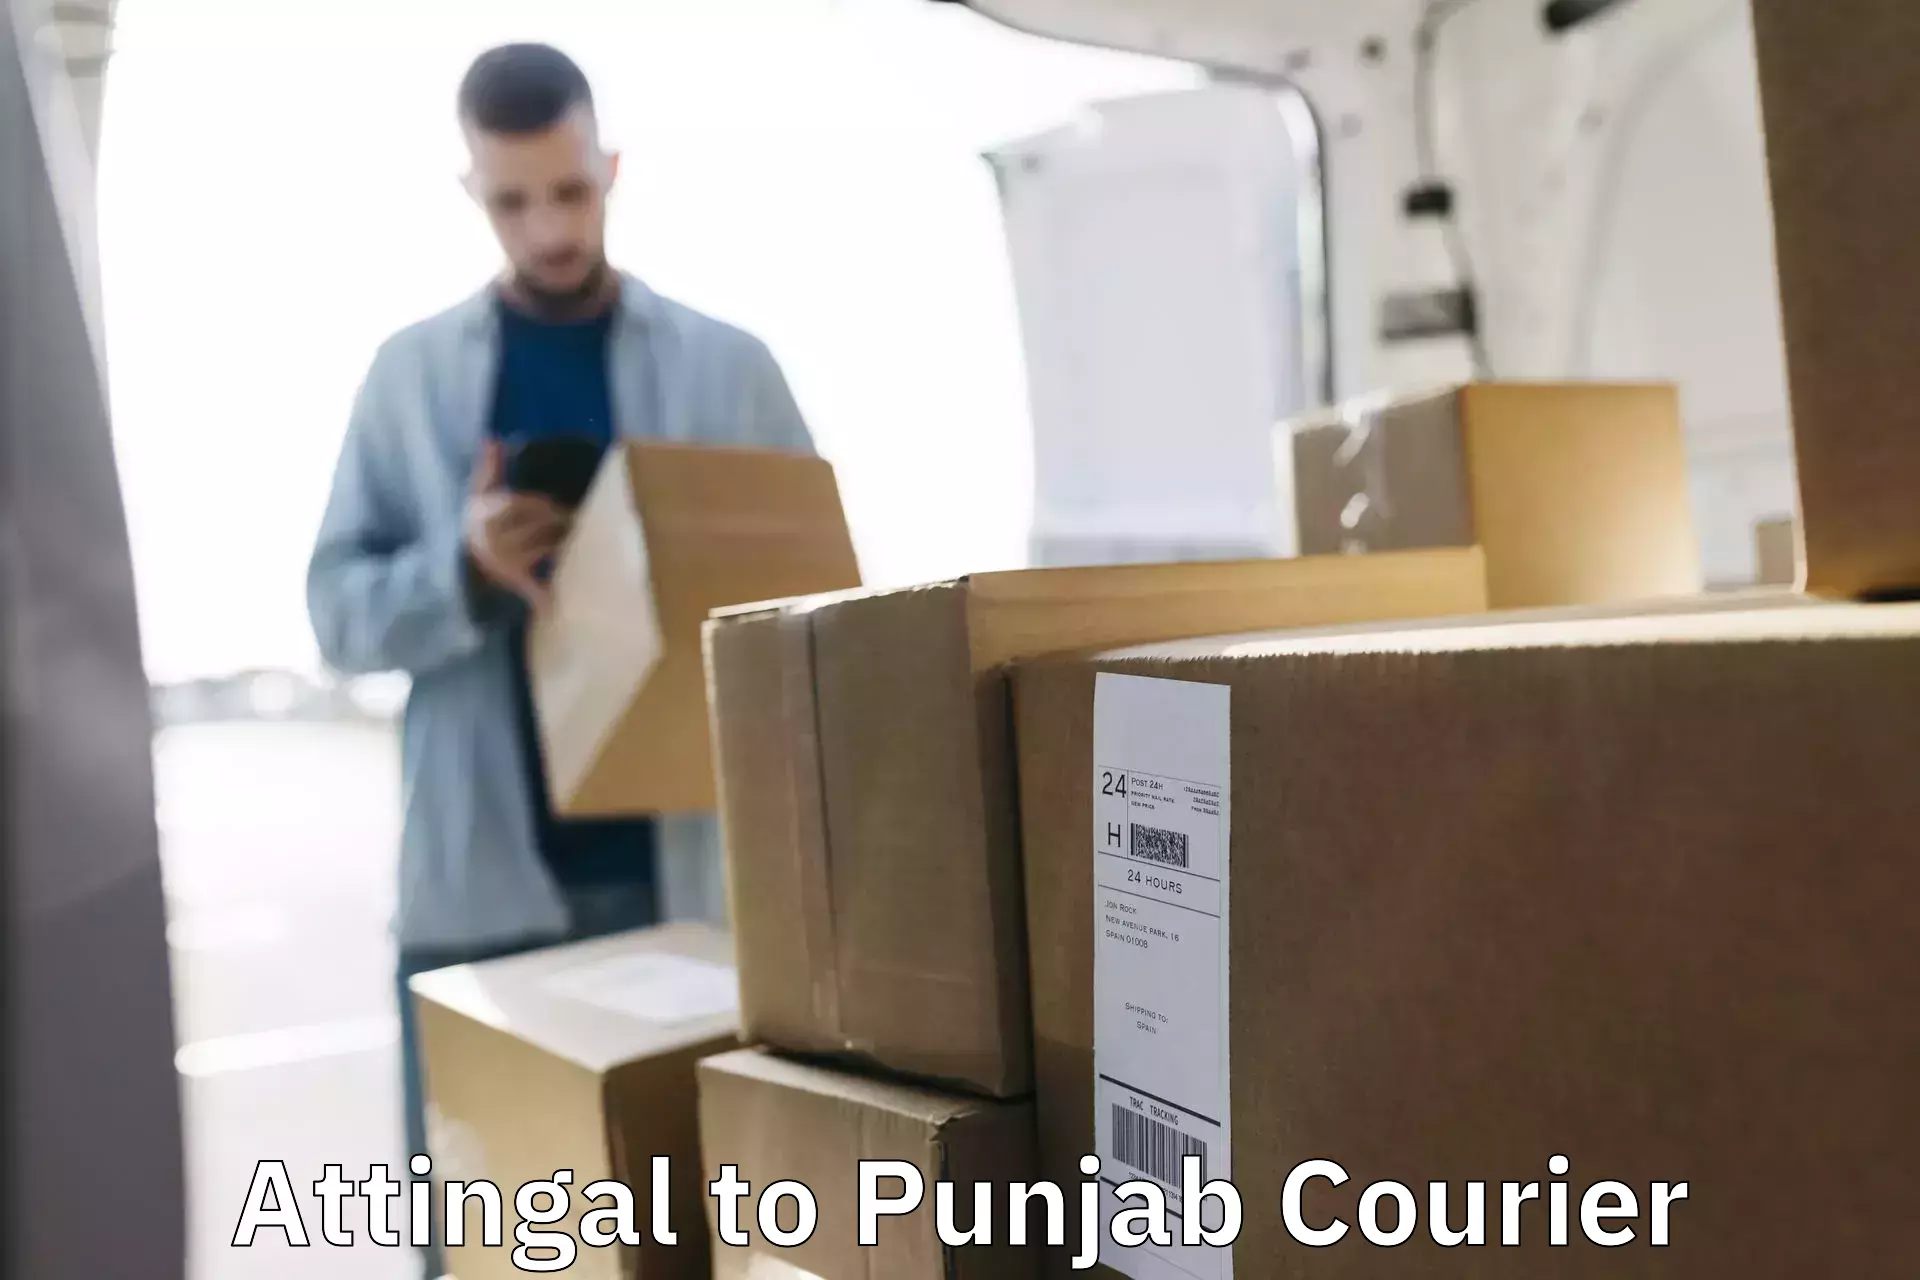 Customizable delivery plans Attingal to Nangal